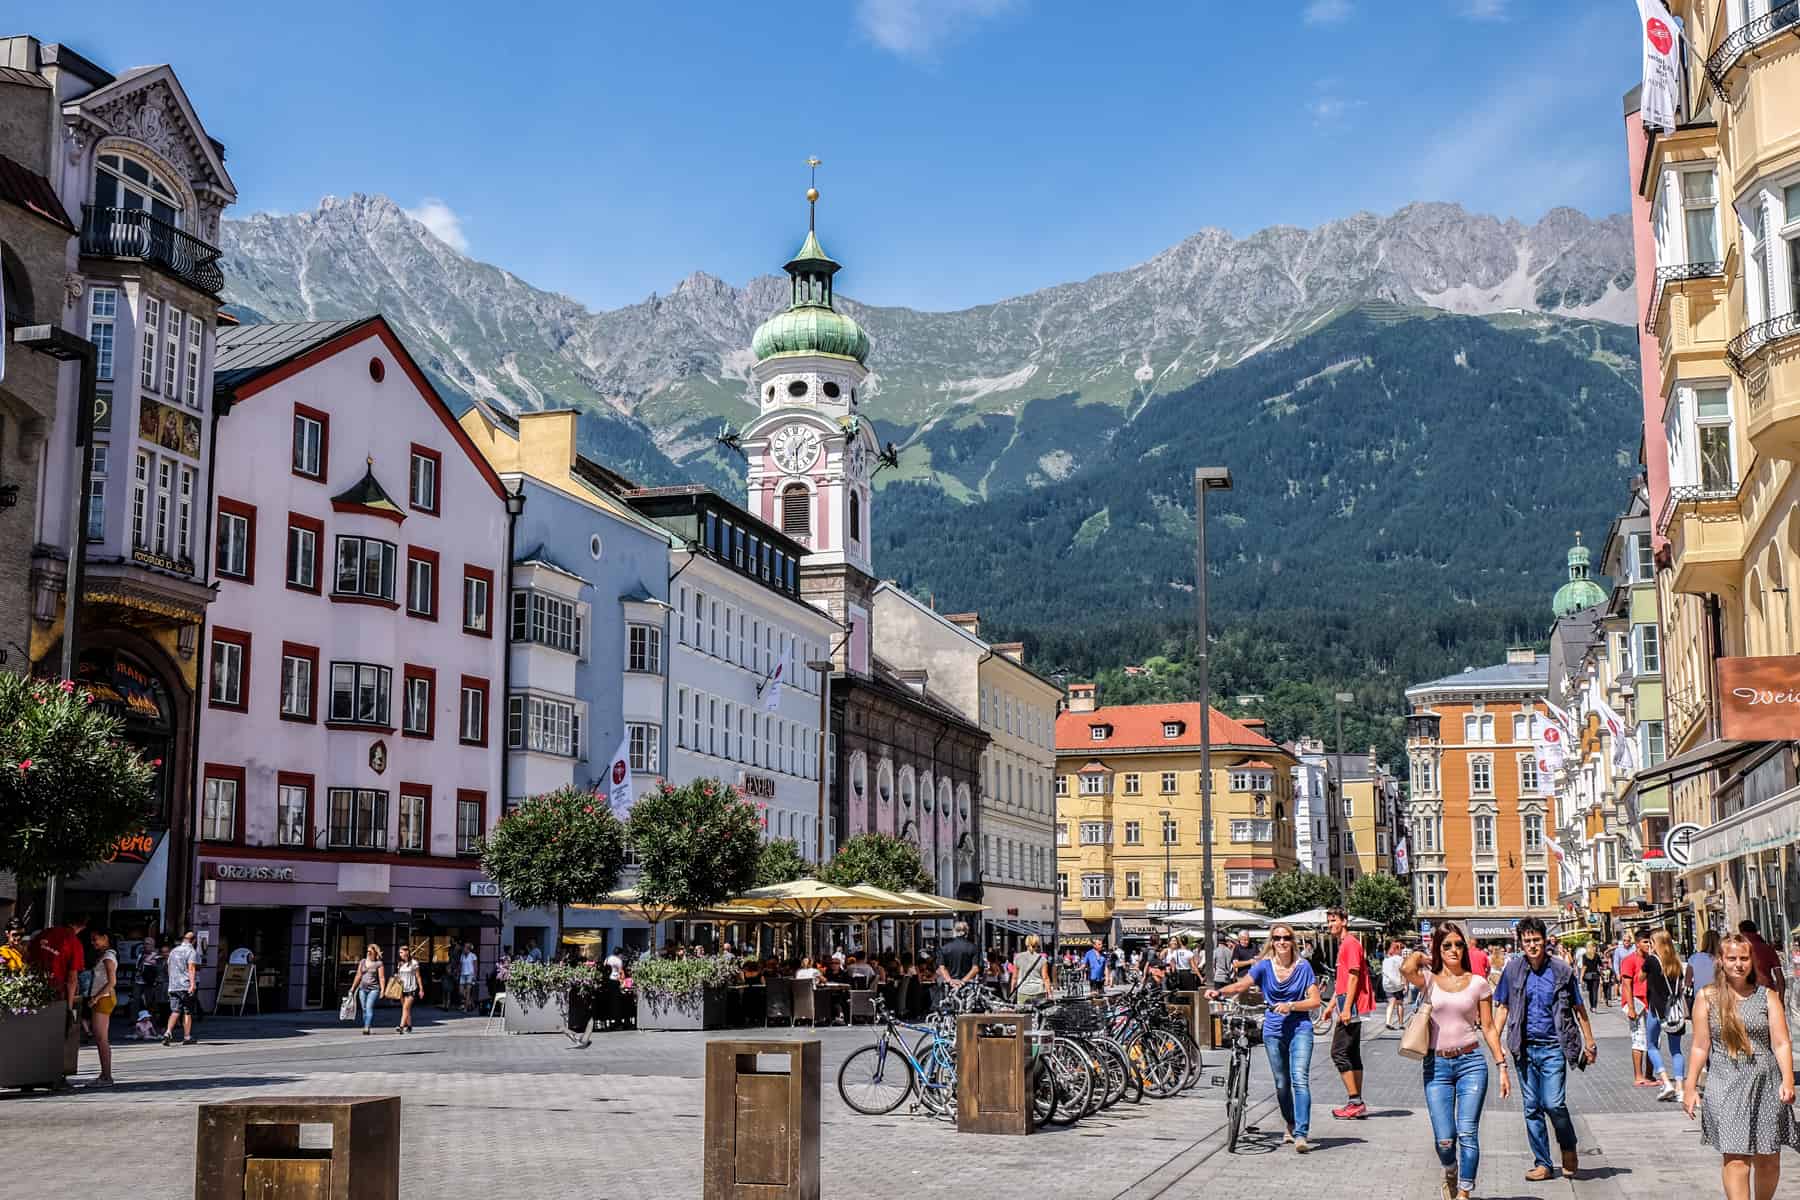 Main square in Innsbruck in Austria, filed with old pastel coloured buildings and backed by mountains